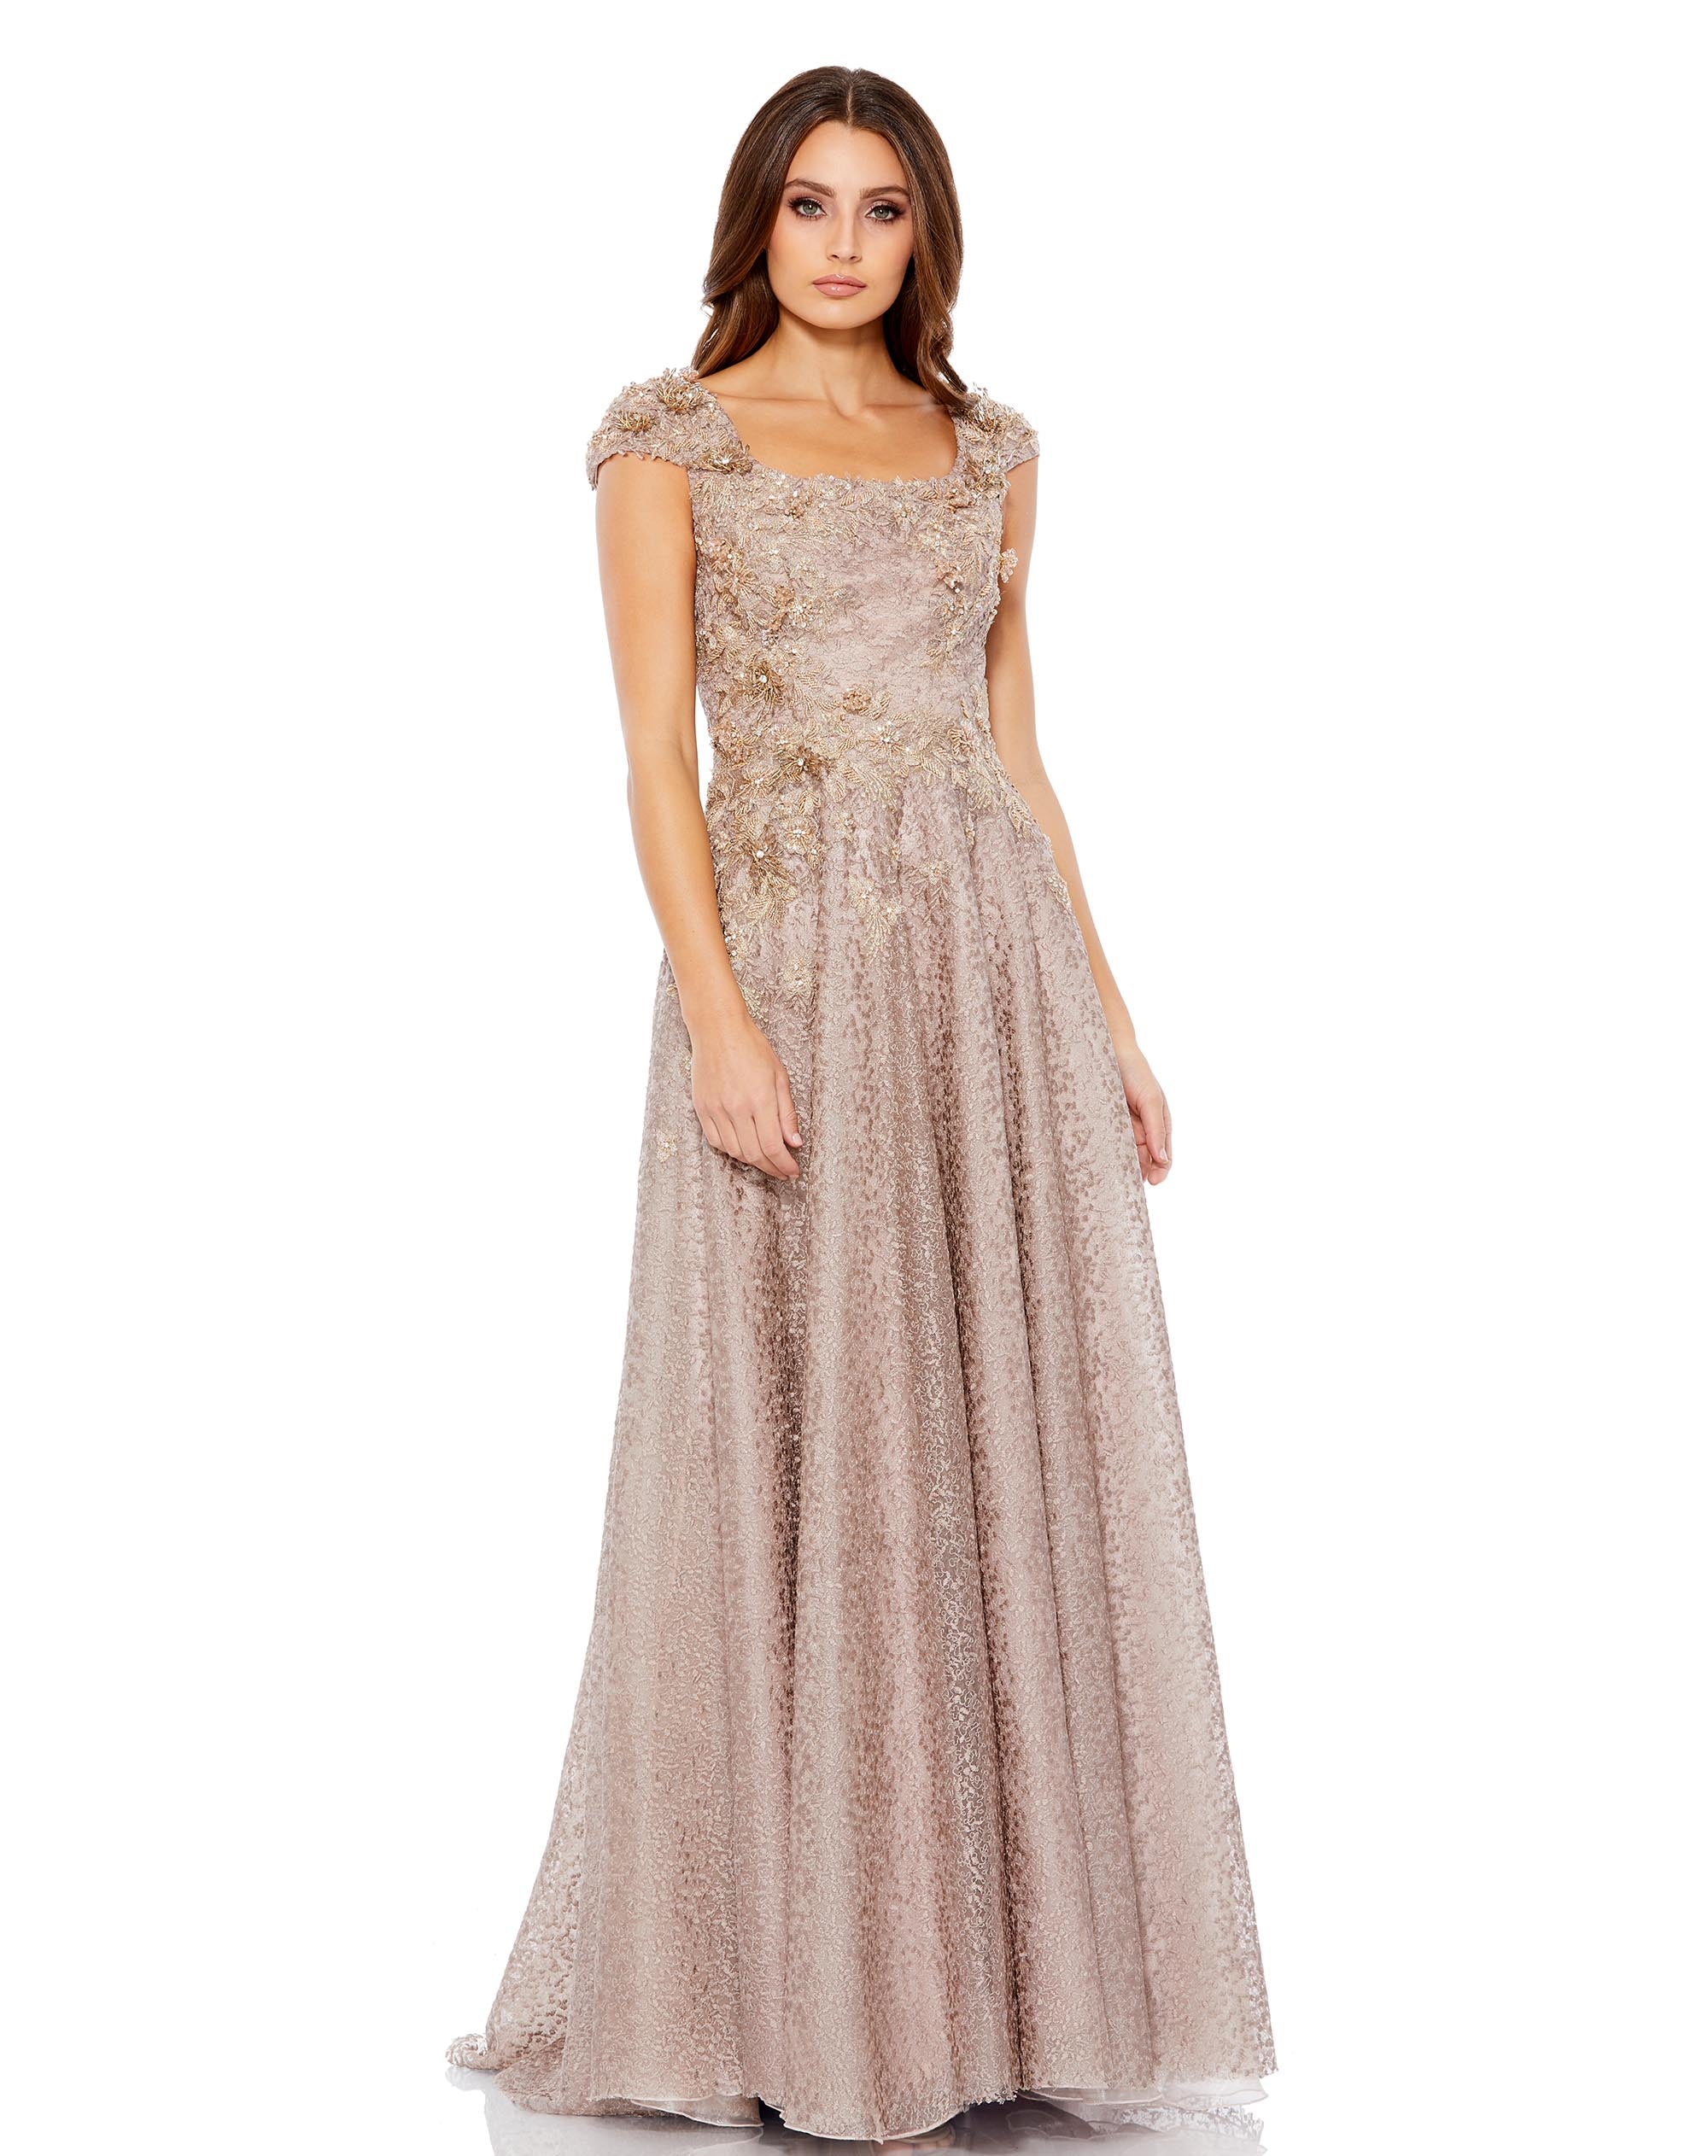 Embellished Cap Sleeve Square Neck A Line Gown